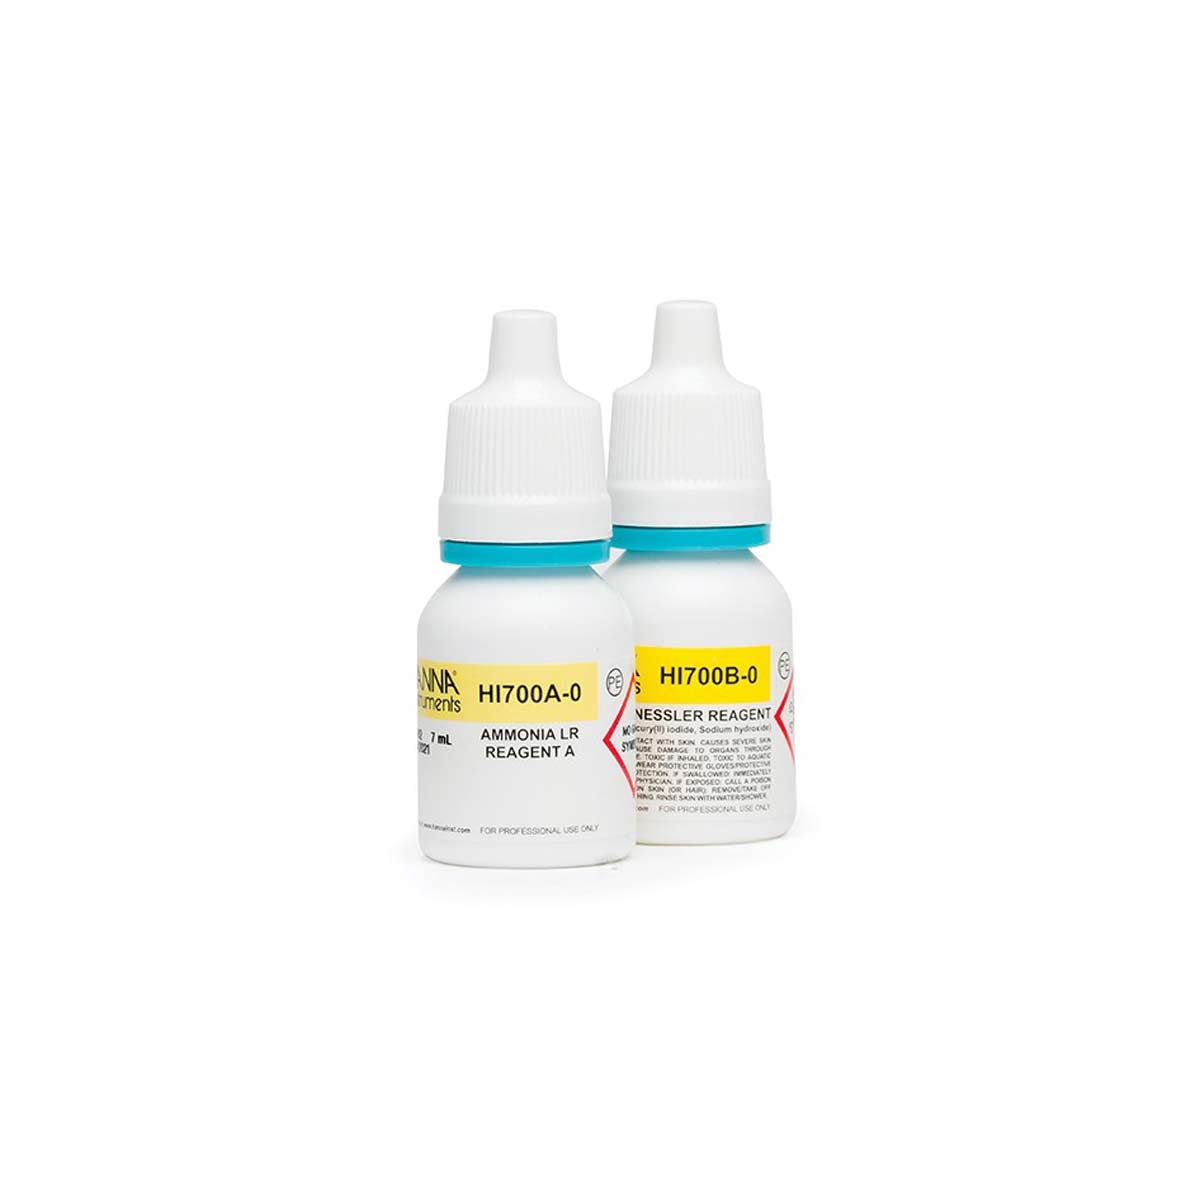 Two bottles of Ammonia Low Range Checker® Reagents (set for 25 tests) by TAS on a white background.